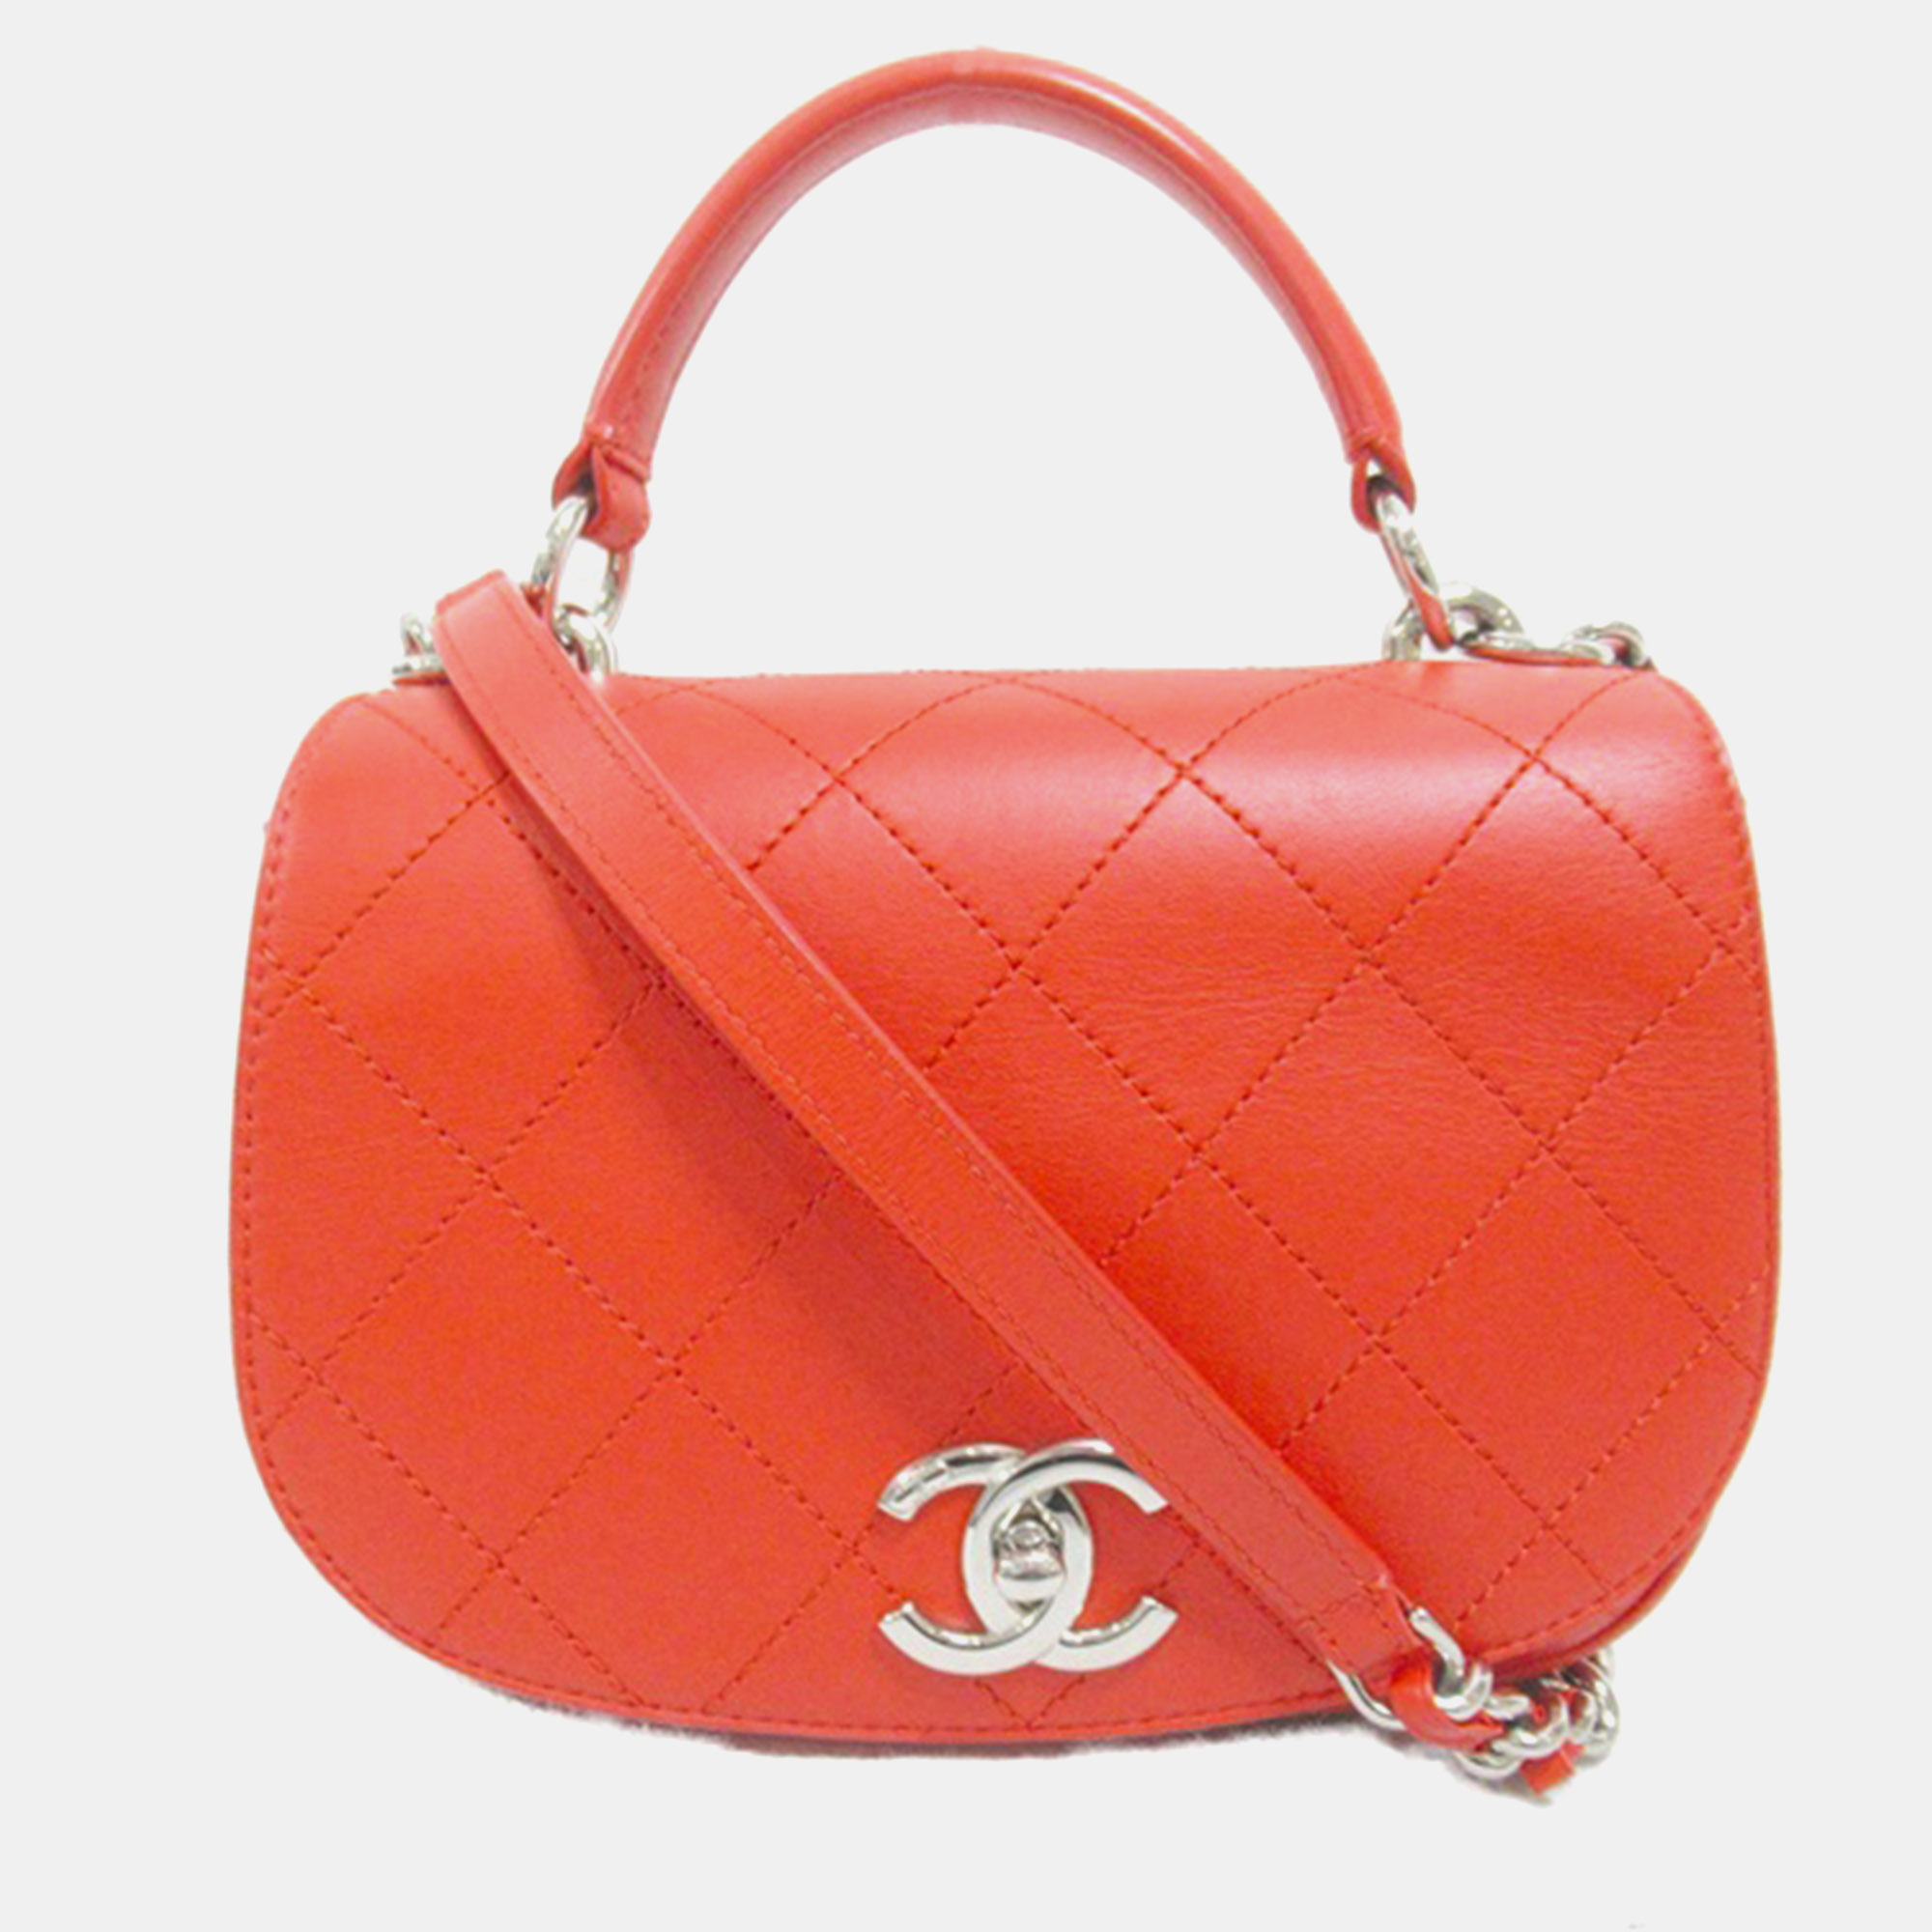 Chanel red leather cc ring my bag flap bag